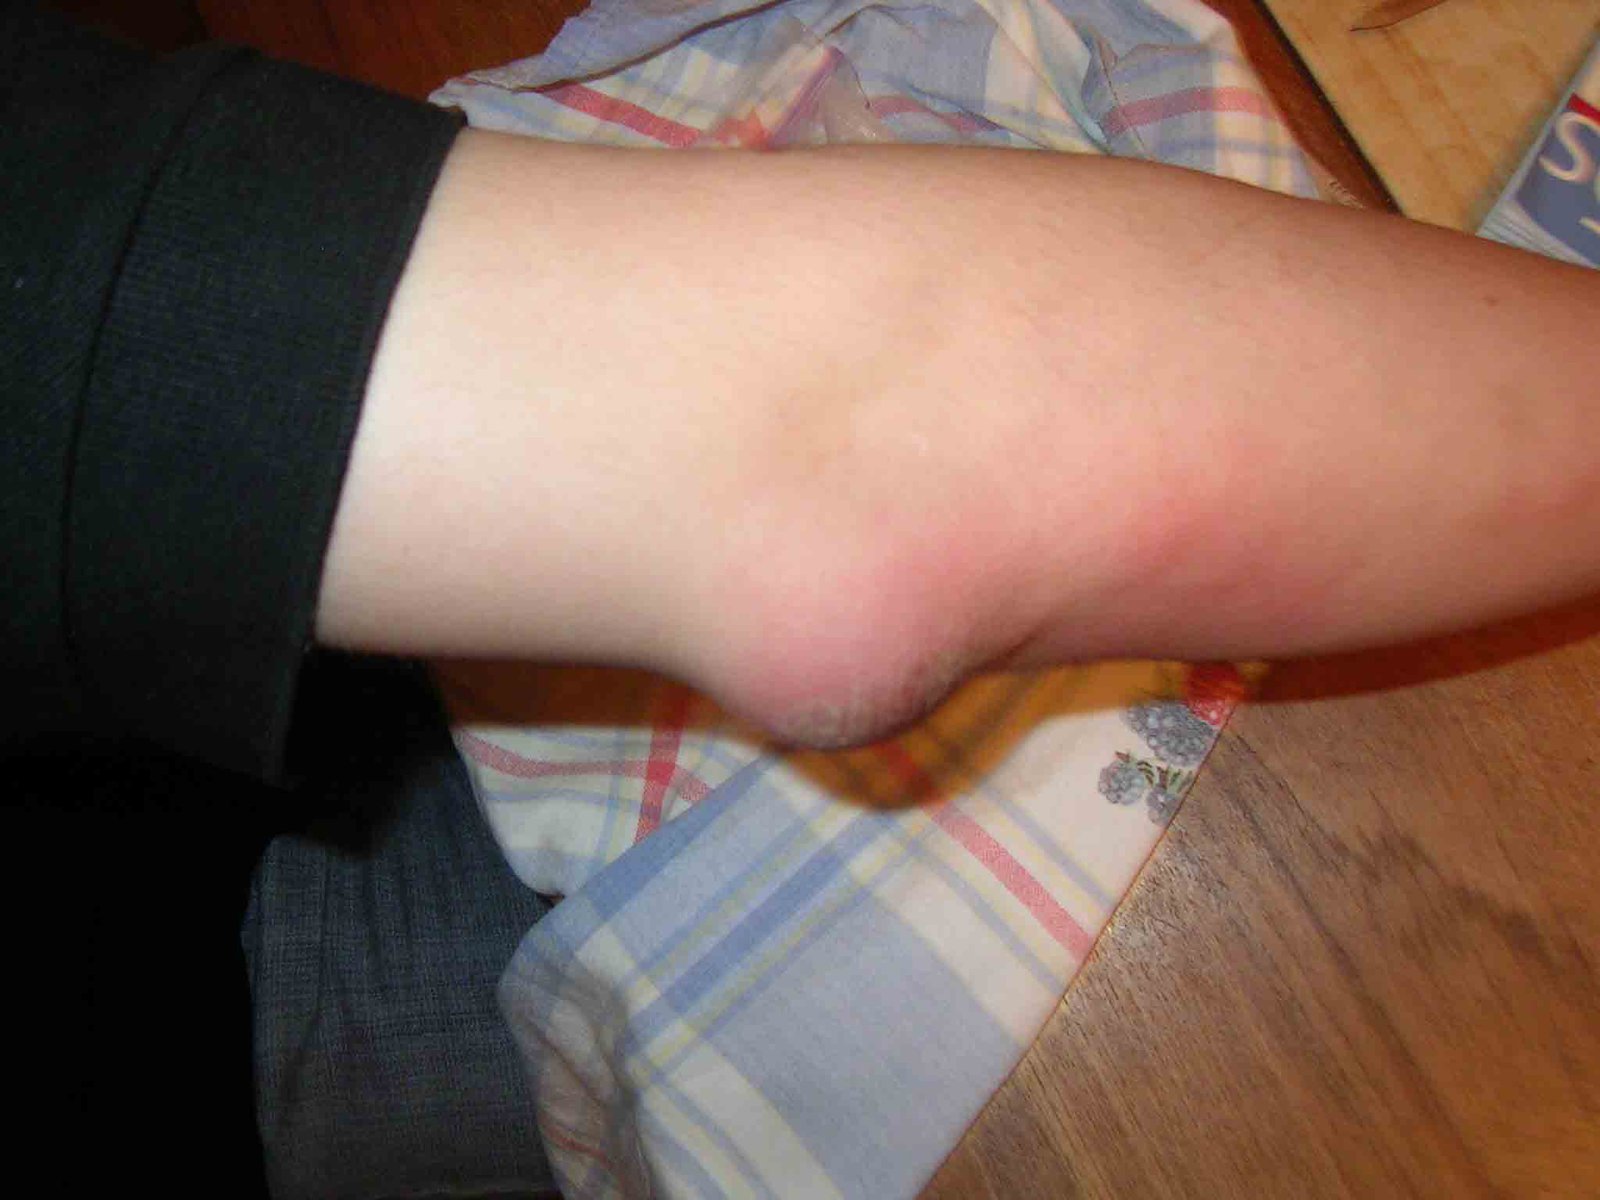 elbow after felt down in the stairs